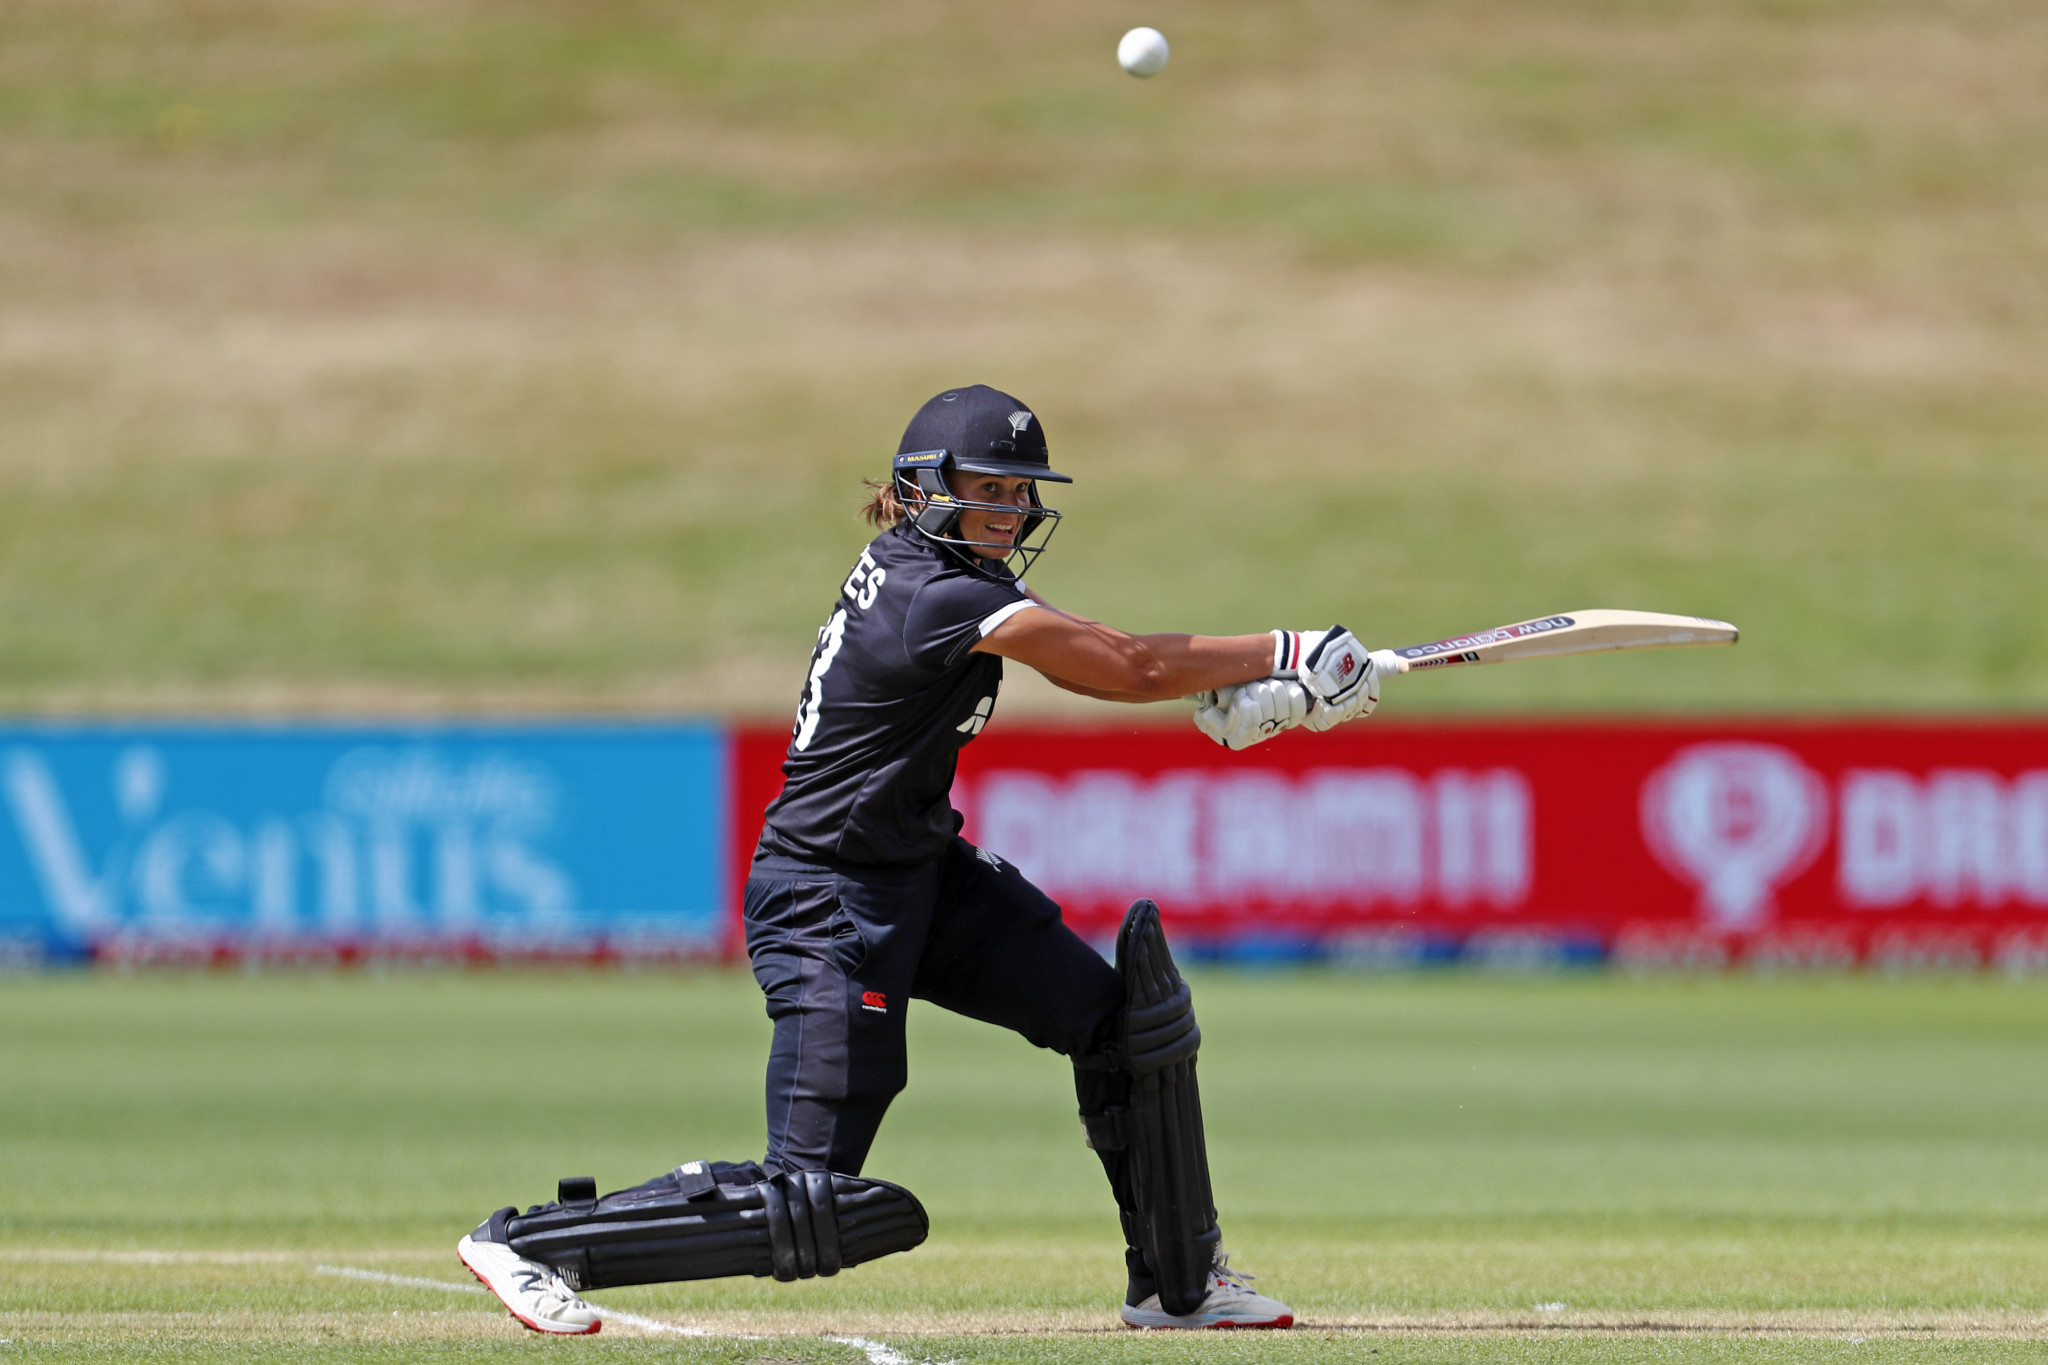 Bates helps hosts New Zealand grab first win of Women’s Cricket World Cup 